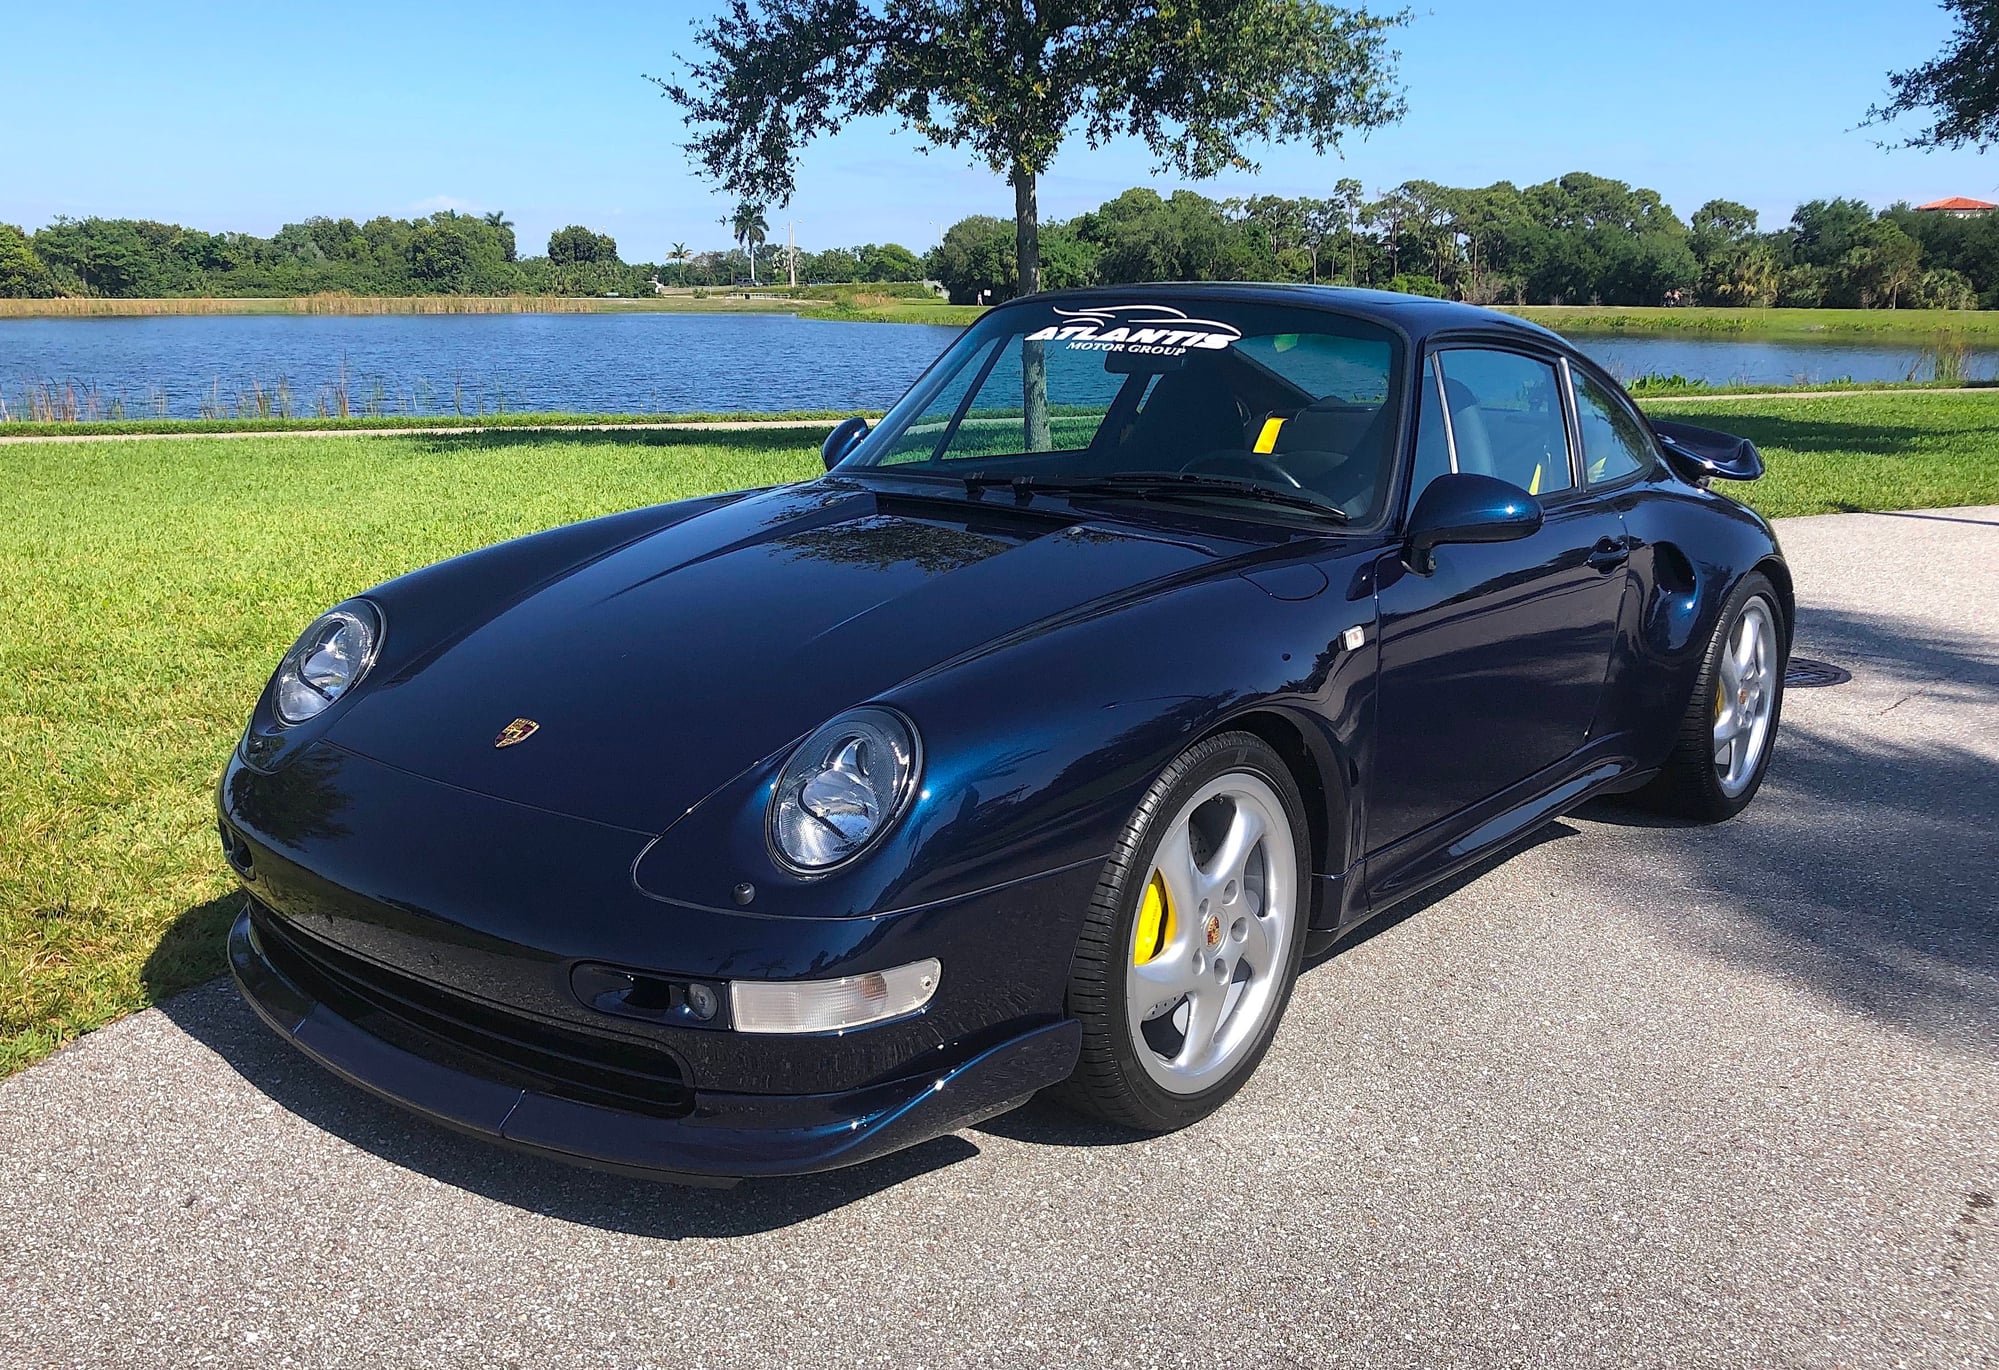 1997 Porsche 911 - For Sale 1997 Porsche Turbo S X50 special wishes, 1 of 2 - Used - VIN WP0ZZZ99ZVS370087 - 14,000 Miles - 6 cyl - 4WD - Manual - Coupe - Blue - Boca Raton, FL 33431, United States